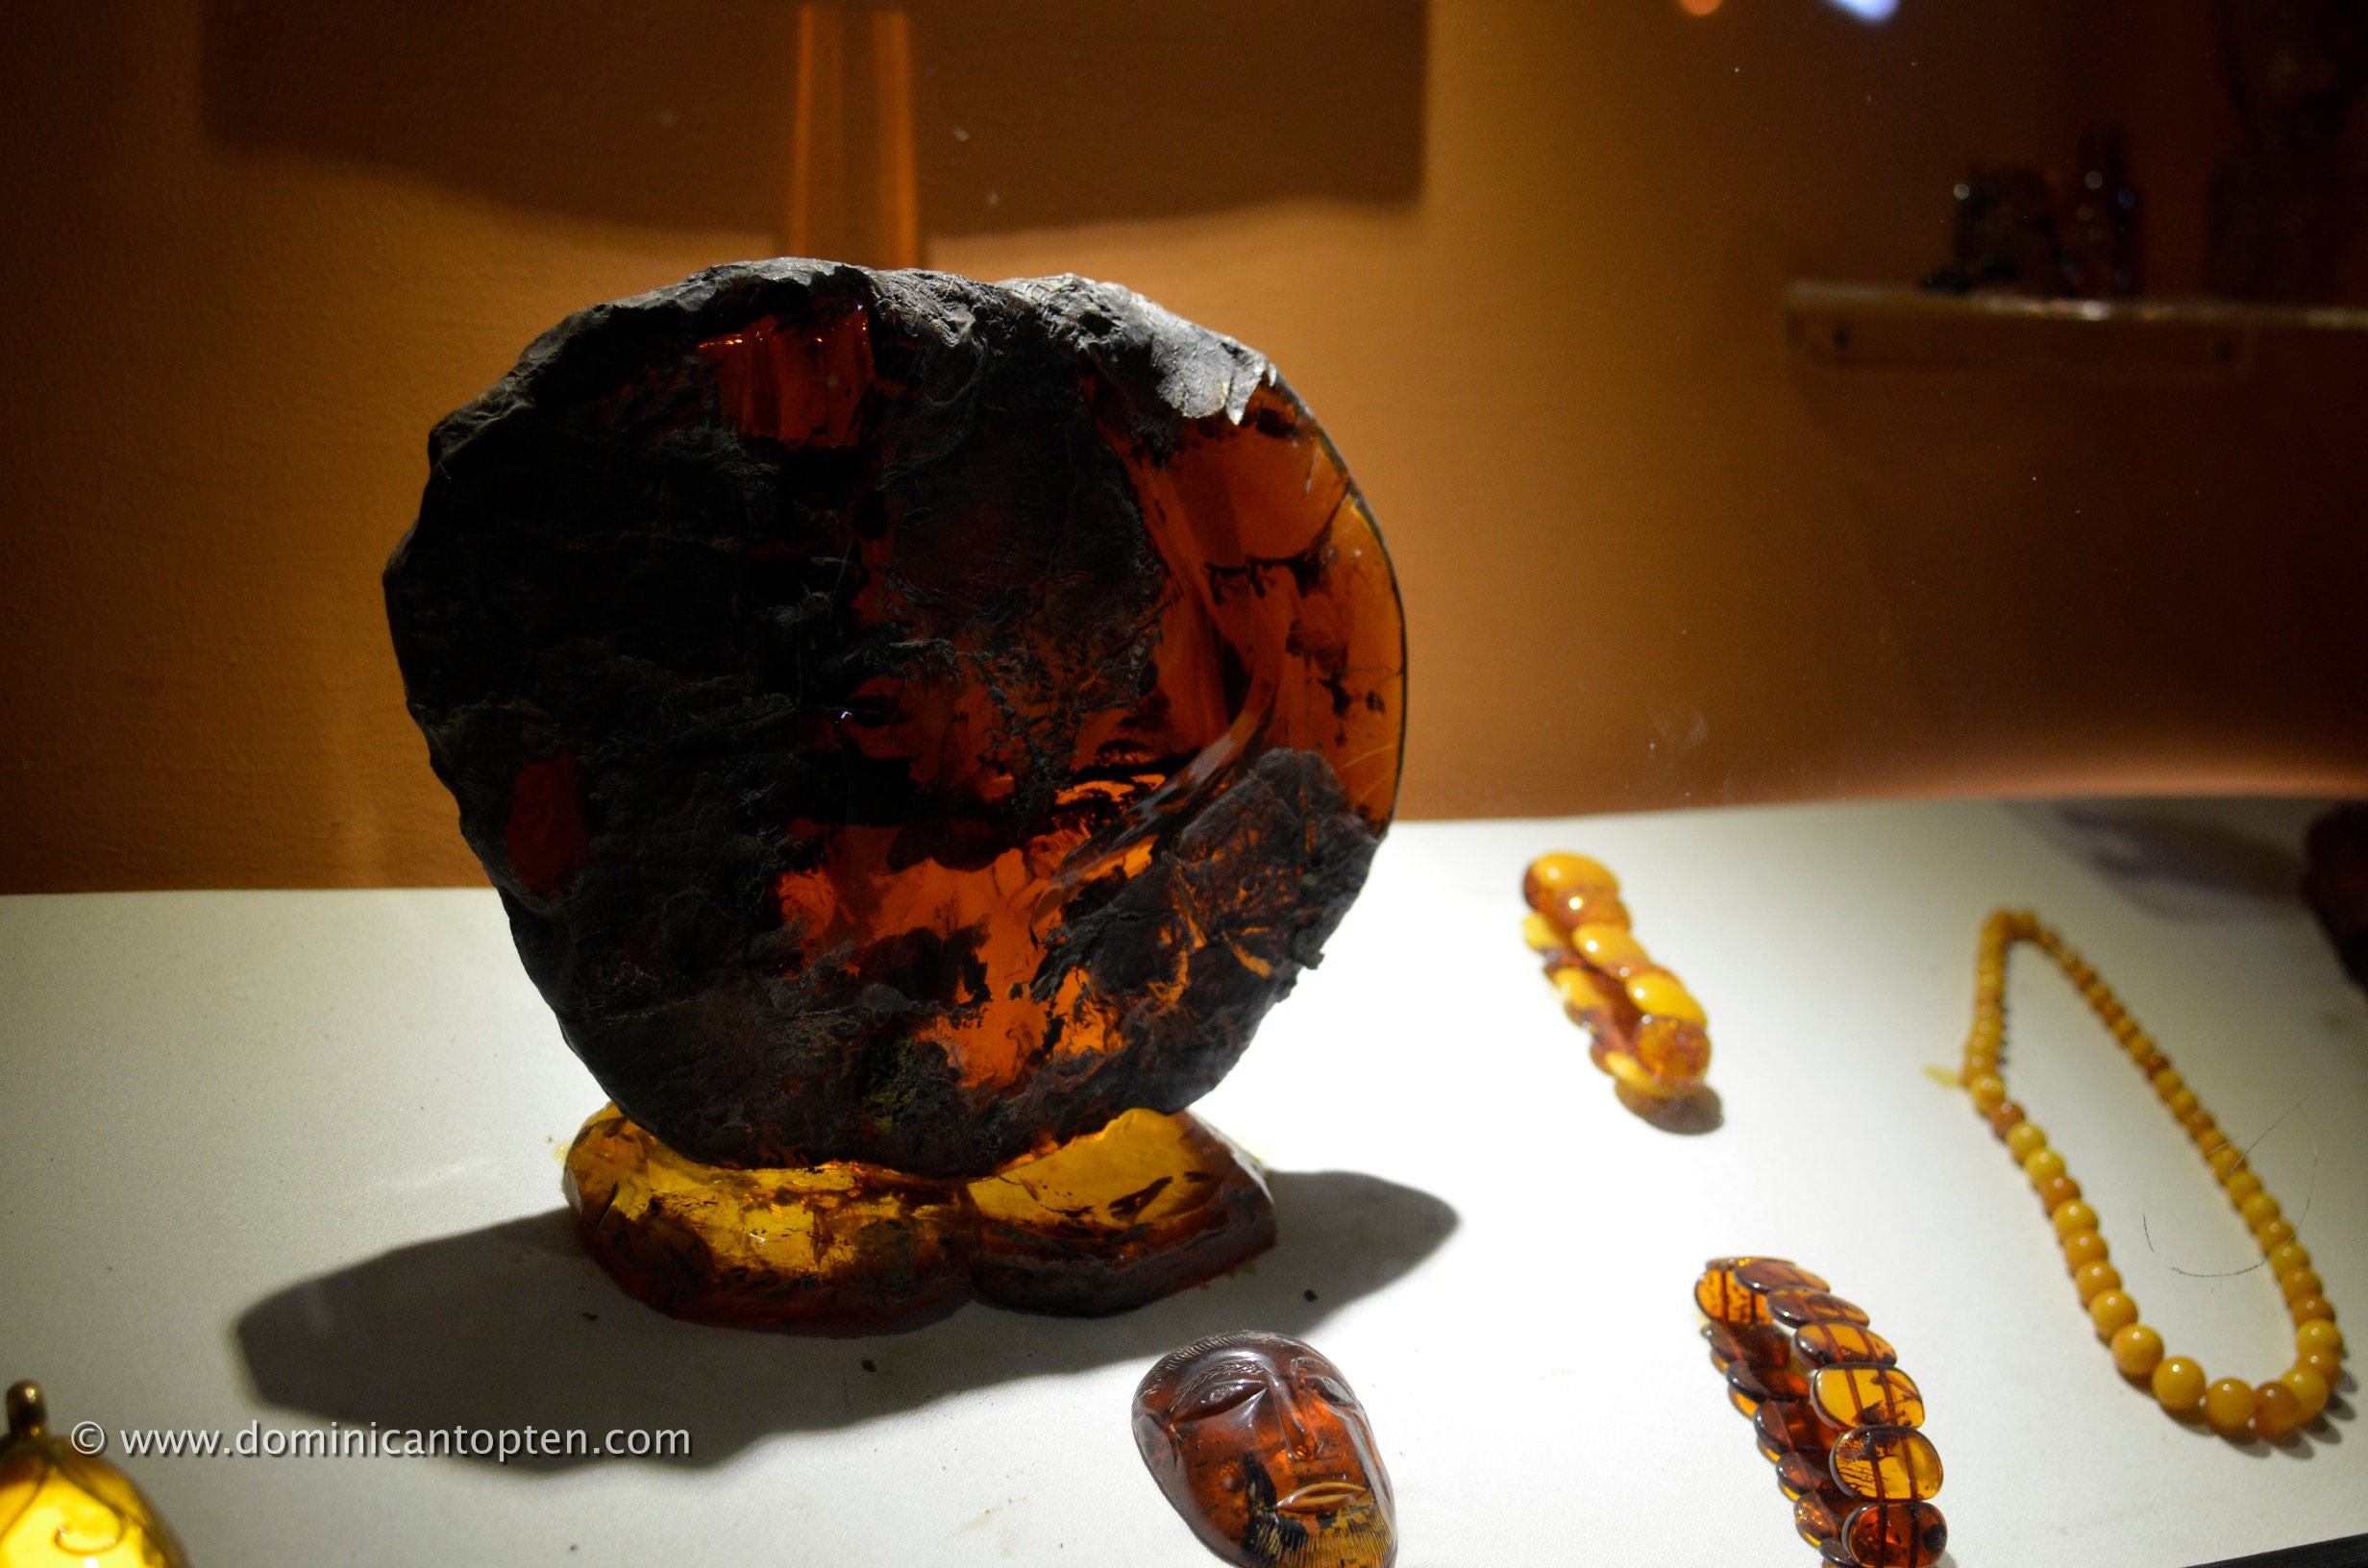 inclusion in amber exhibited at the amber gallery